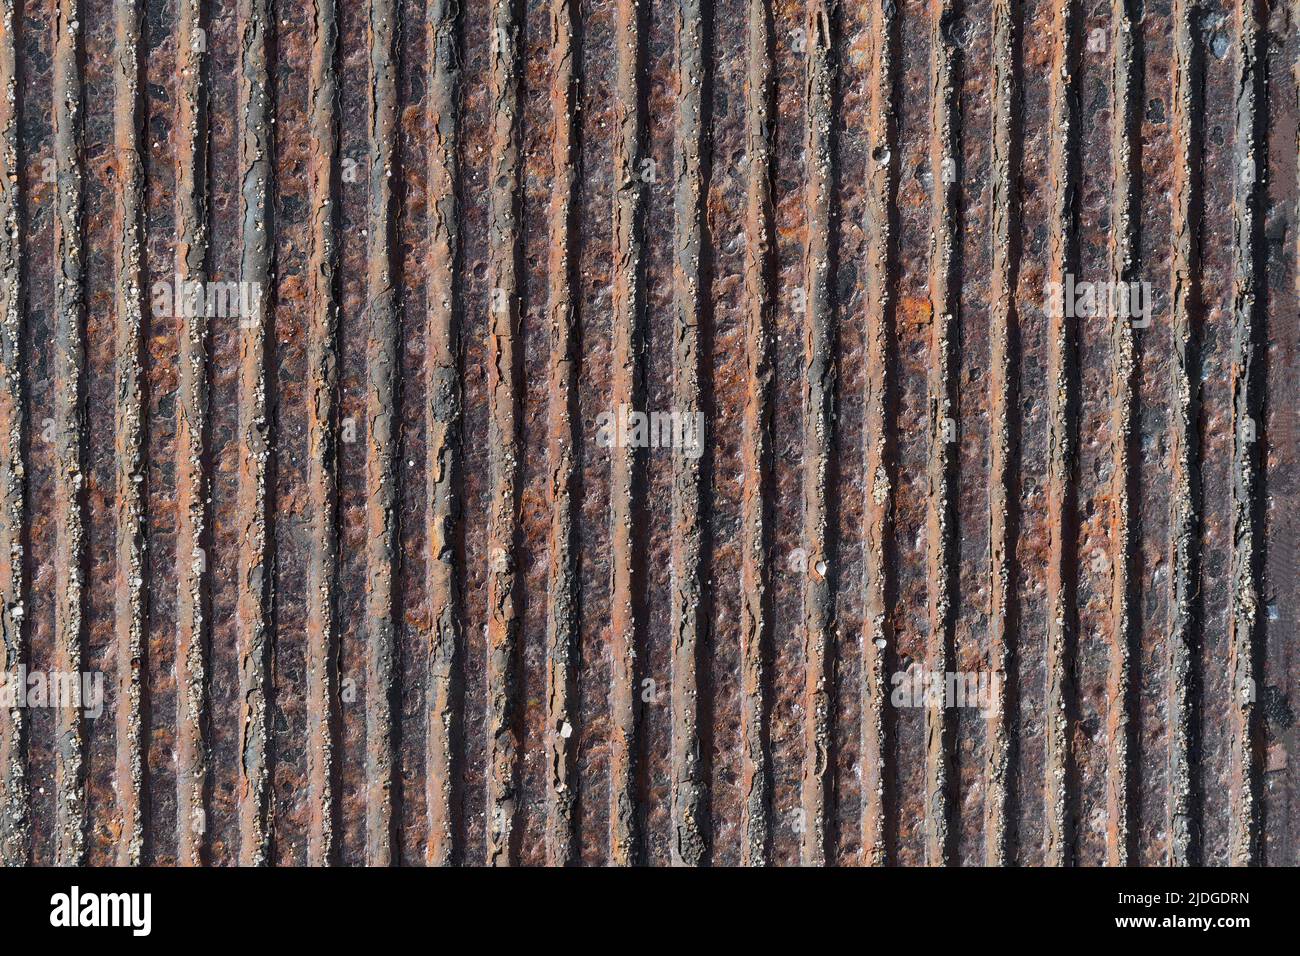 Grunge background made from a rusty iron panel Stock Photo